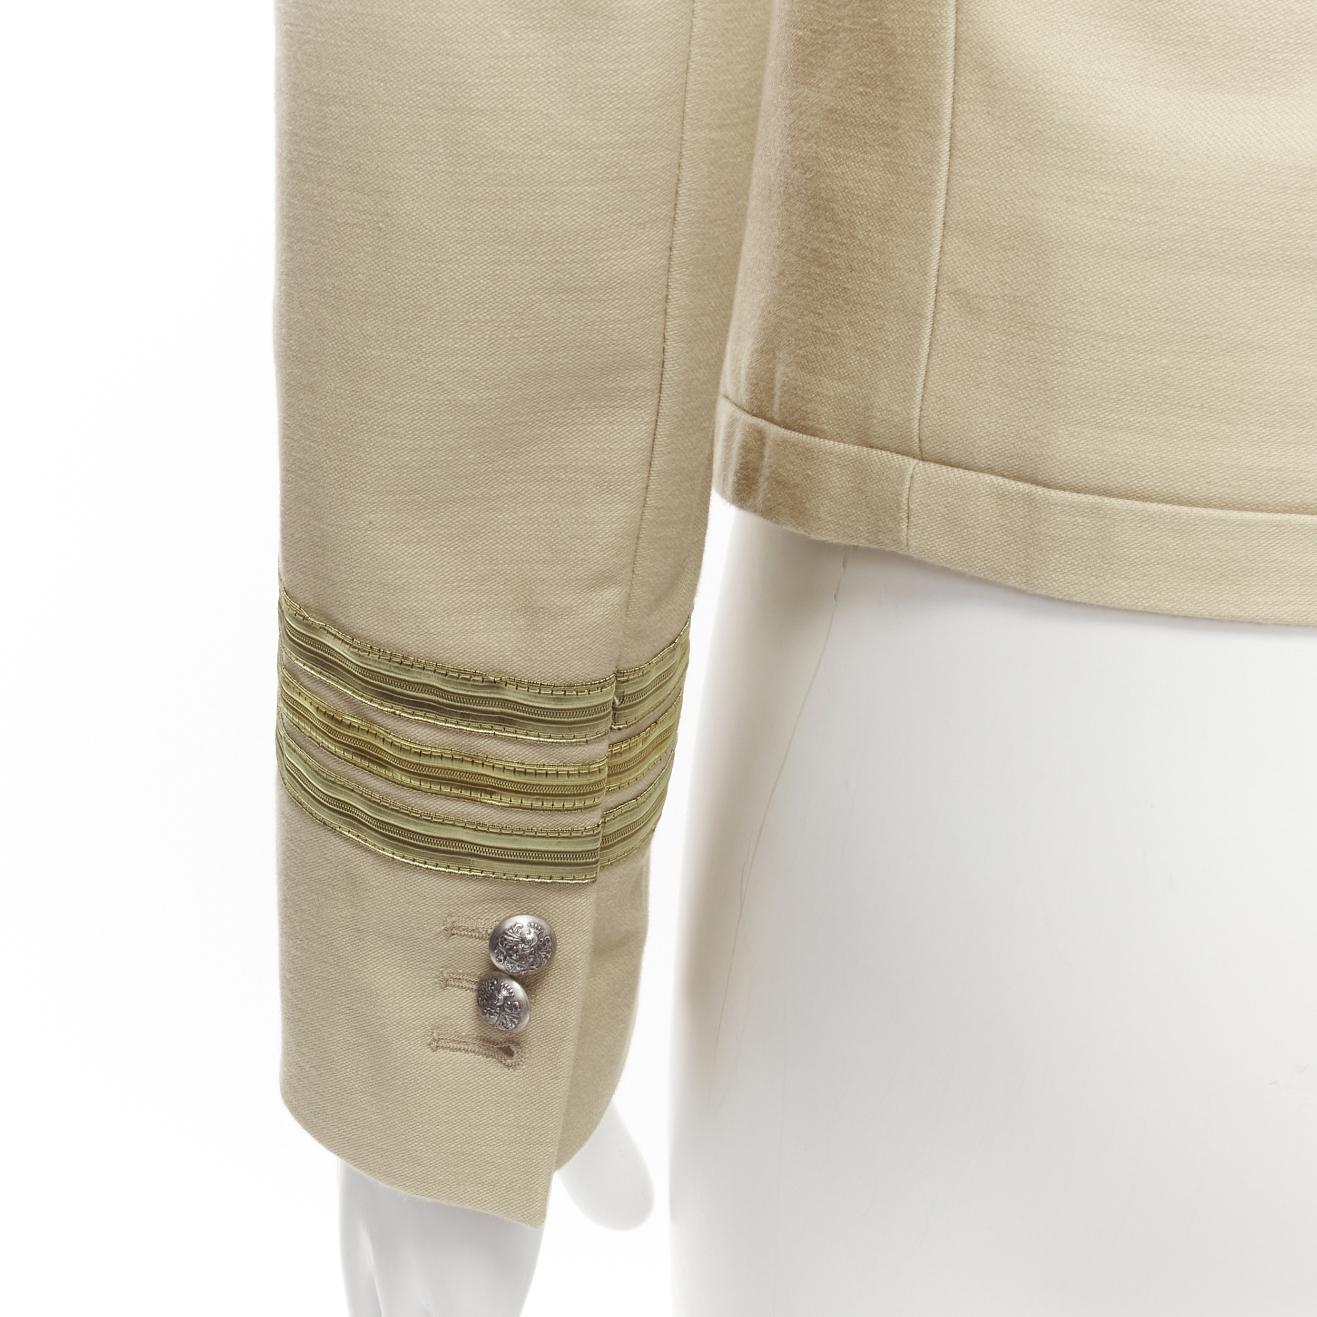 BALMAIN beige cotton military officer gold trim zippers cropped fitted jacket EU46 S
Reference: EDTG/A00083
Brand: Balmain
Designer: Olivier Rousteing
Material: Cotton
Color: Nude
Pattern: Solid
Lining: Beige Fabric
Extra Details: Gold trimming at